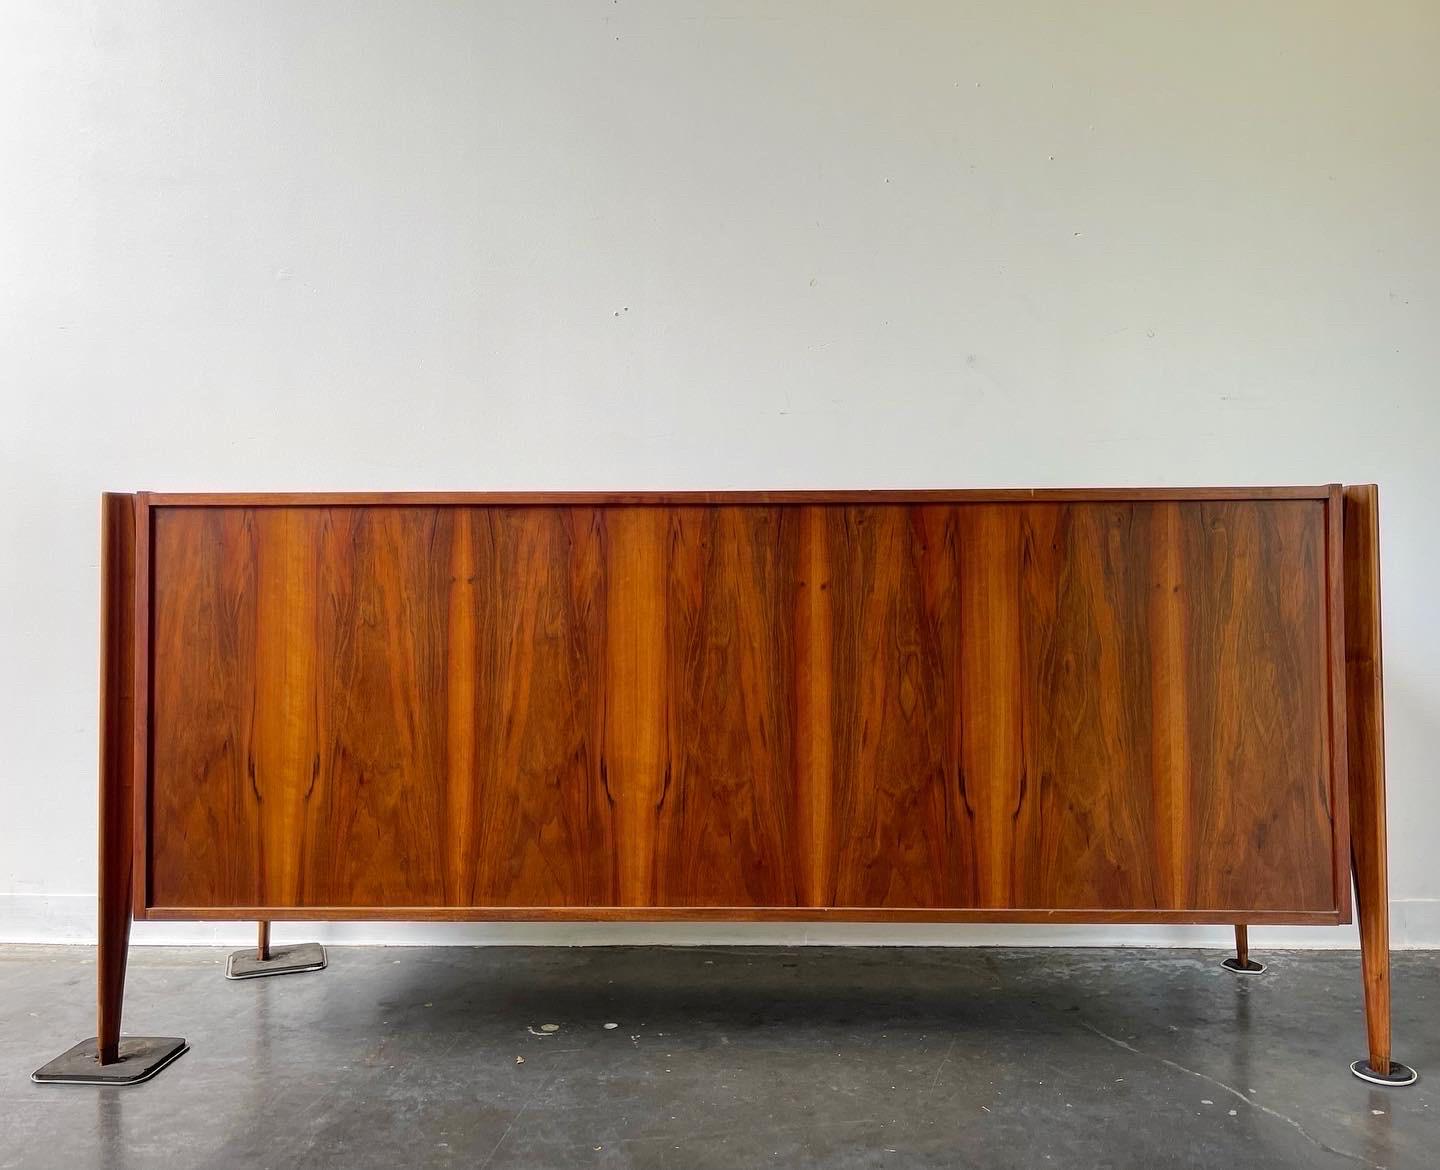 Stunning sculptural lowboy dresser in the style of William Hinn designed by Iorgen Clausen for Brande Mobelfabrik DEnmark circa 1960’s.

This is an exact design as the Hinn dresser but the quality is actually superior in many opinions.

8 Drawer